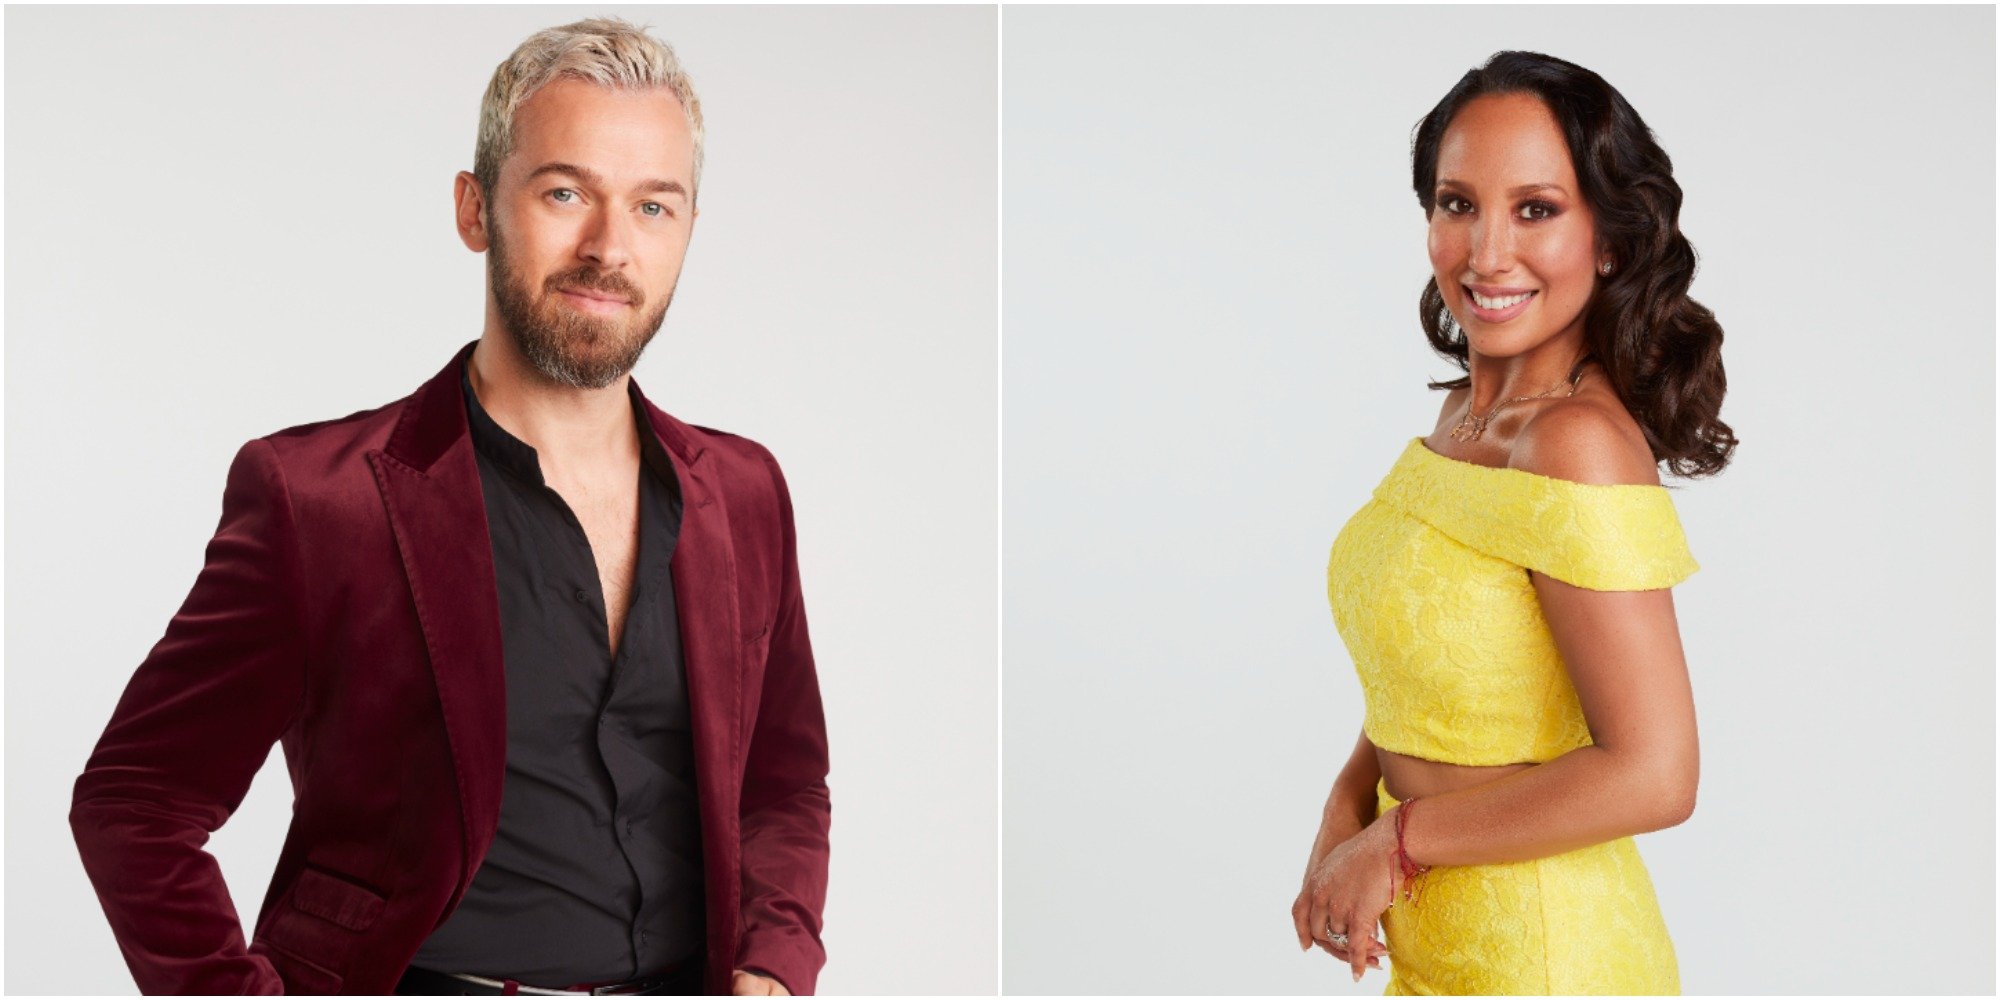 Artem Chigvintsev and Cheryl Burke pose in promotional photos for "Dancing with the Stars" season 30.